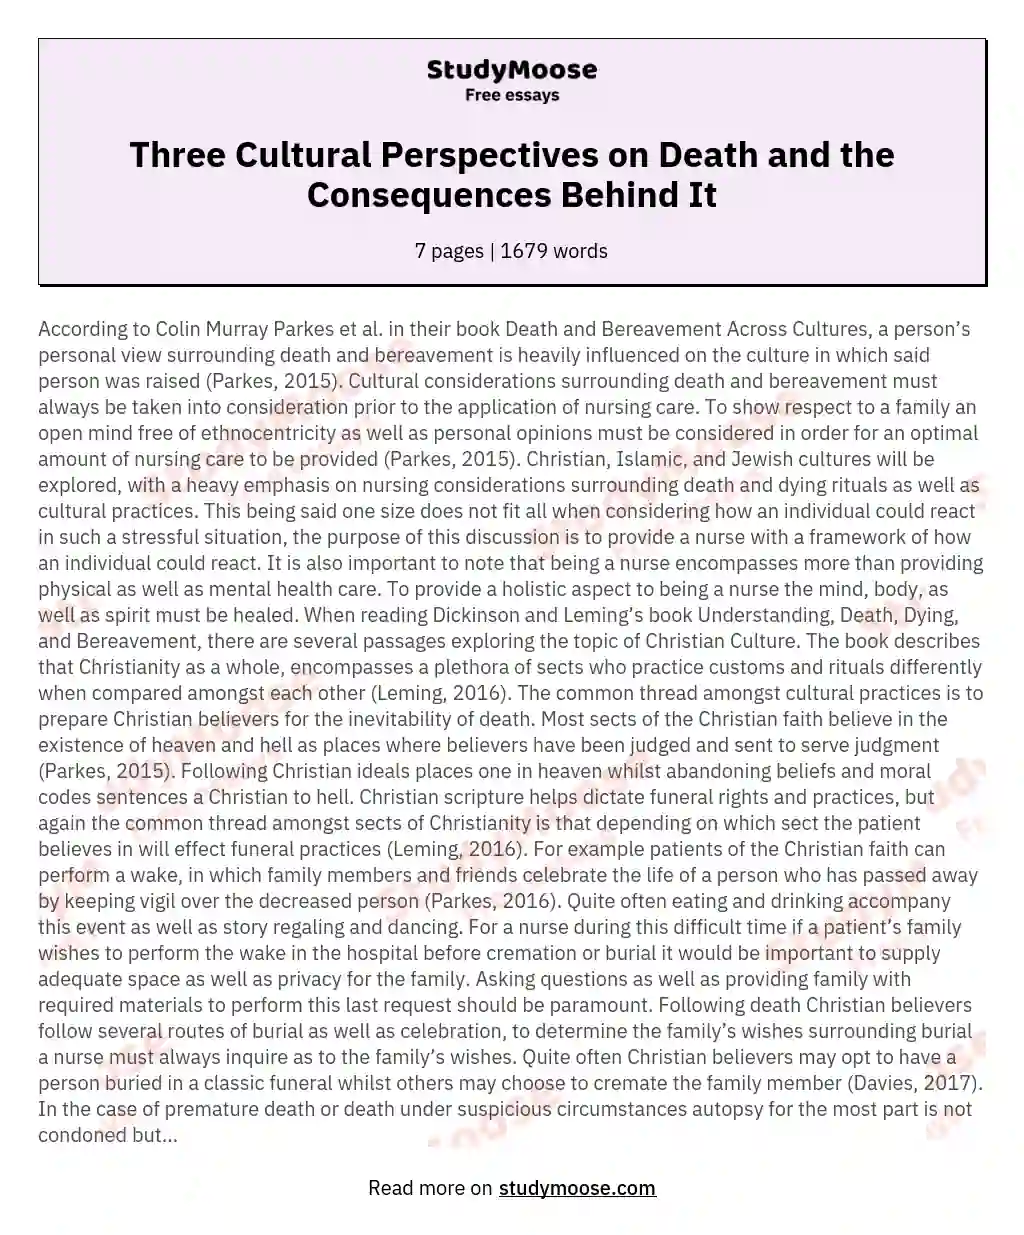 Three Cultural Perspectives on Death and the Consequences Behind It essay